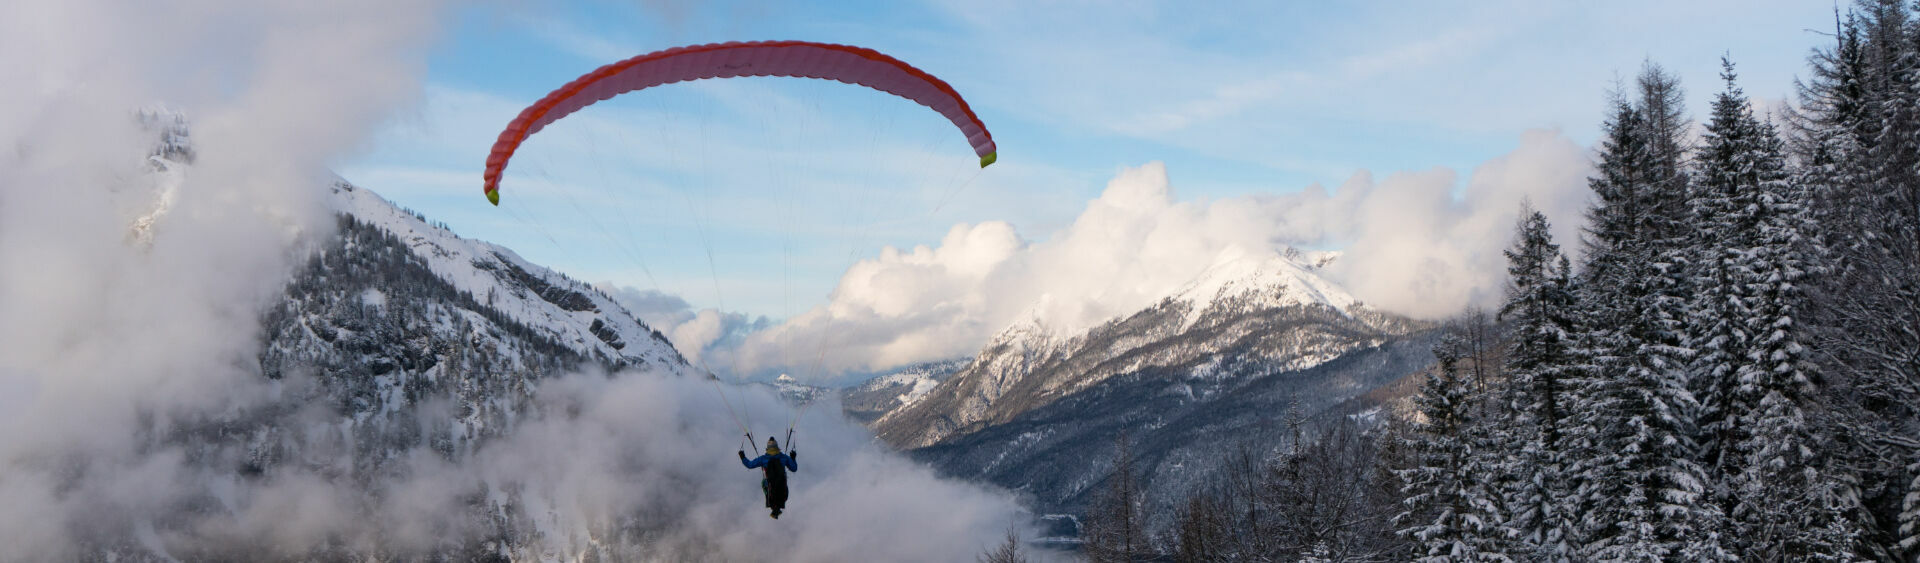 A paraglider swooping through the winter skies enjoying the view of the wintry landscape and Lake Achensee from above.